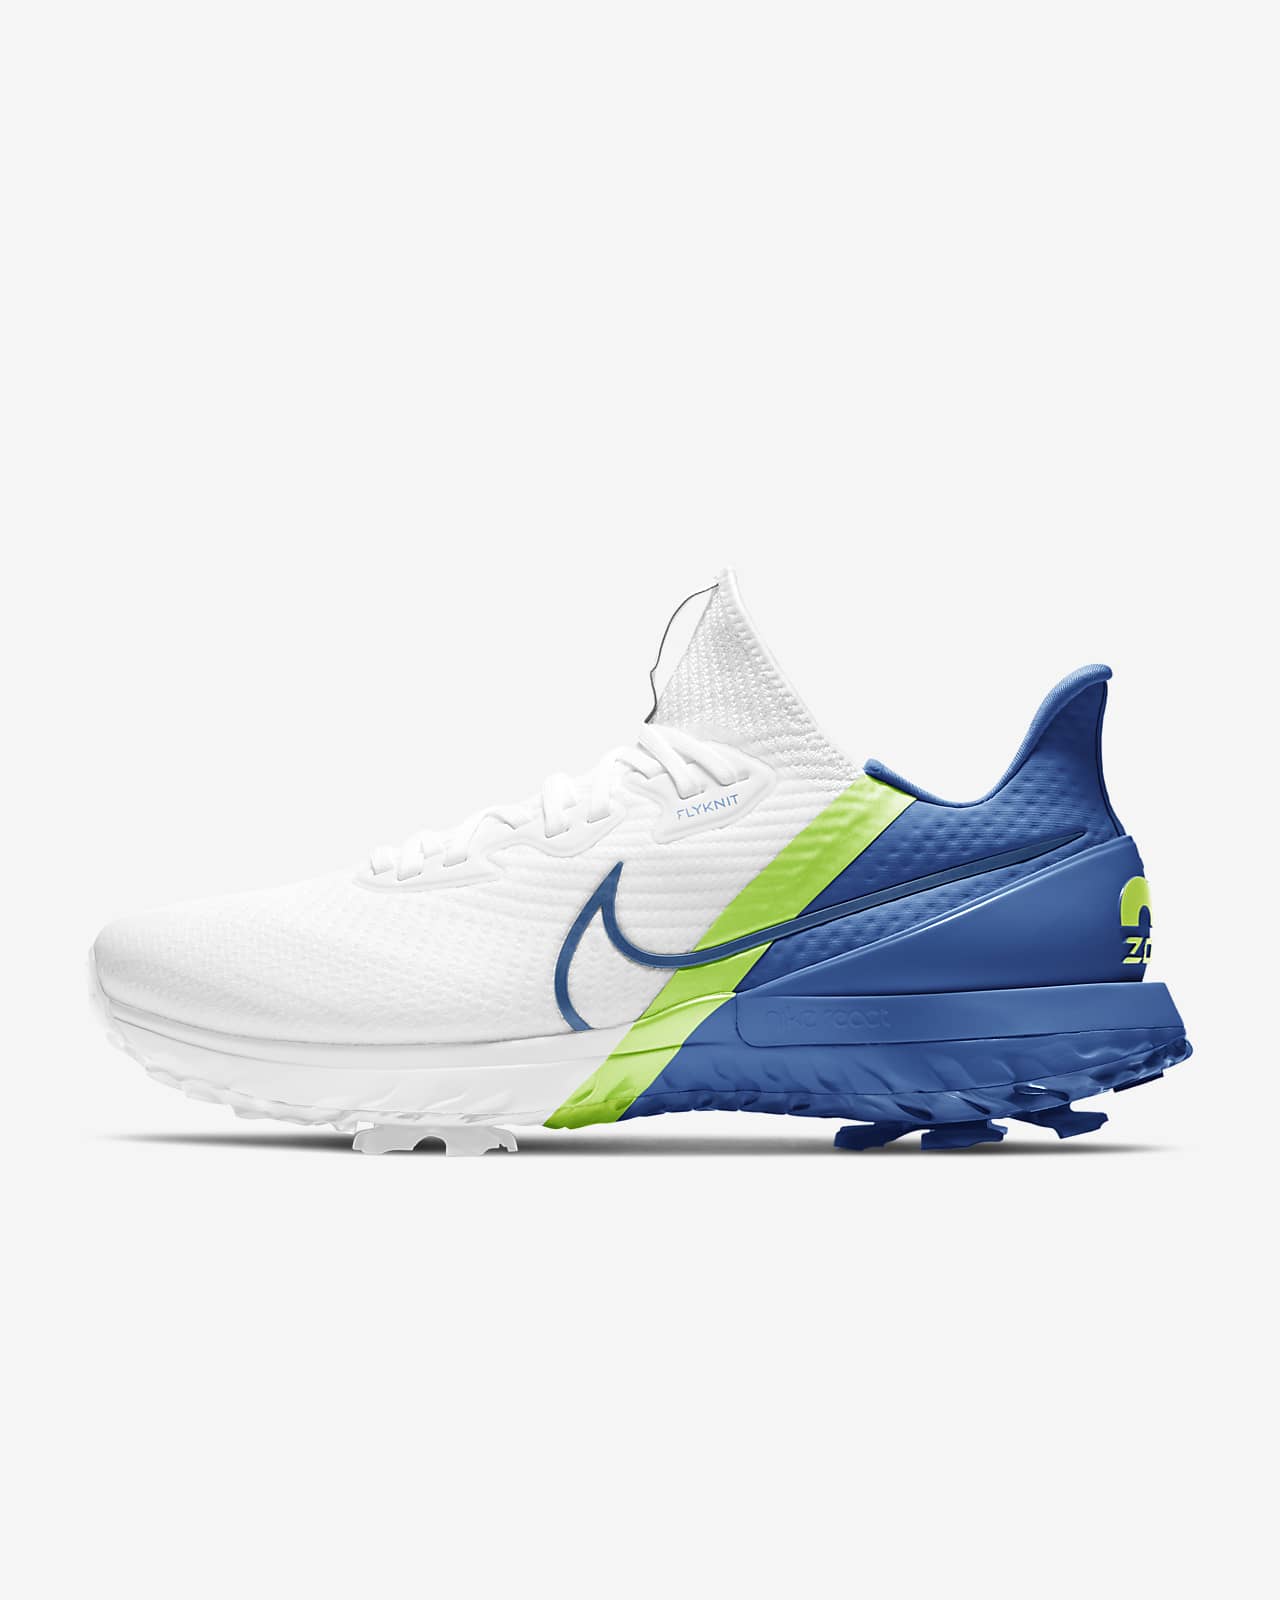 nike air zoom infinity golf shoes